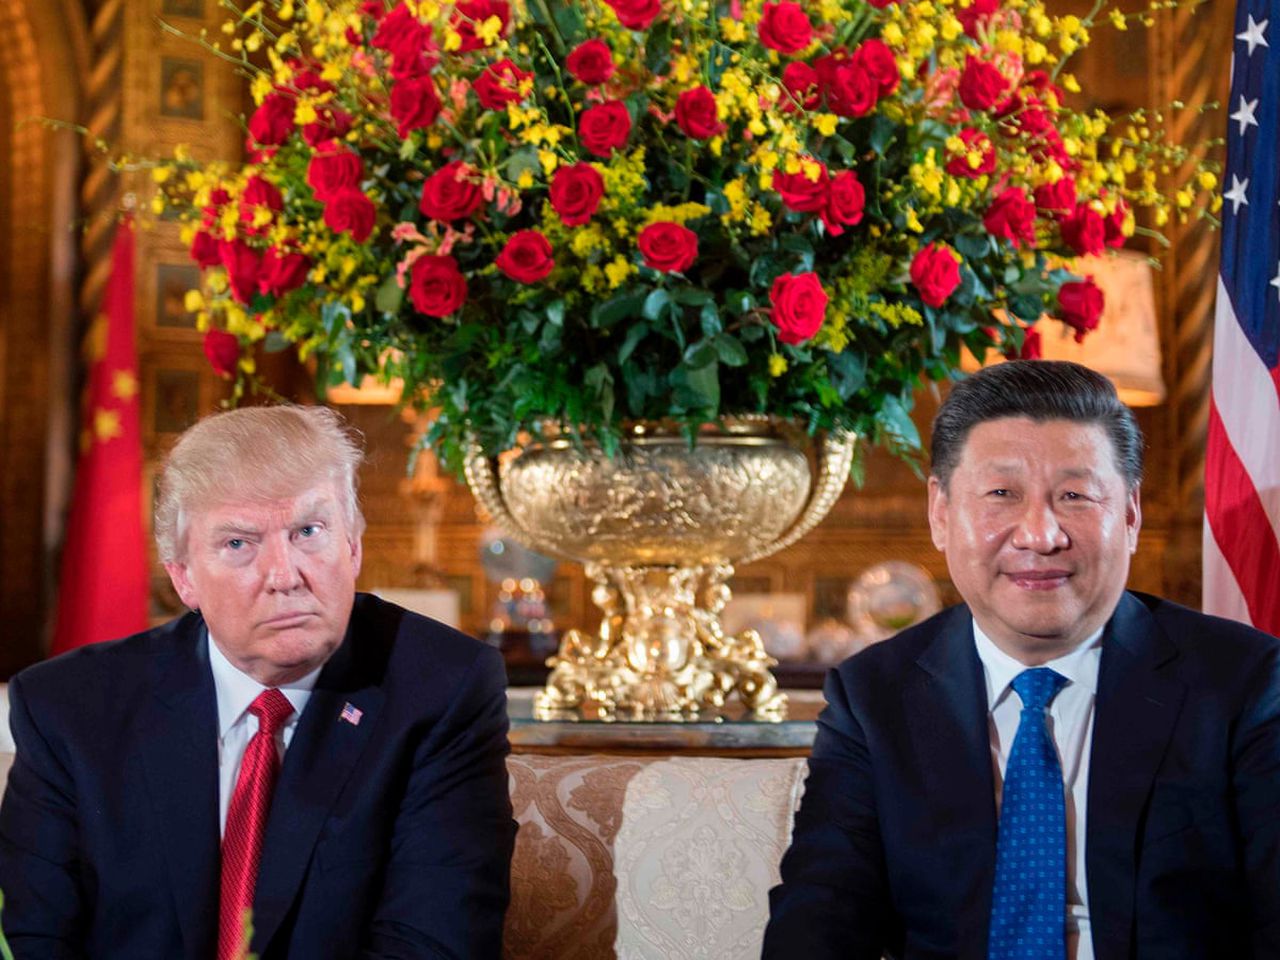 We’re in for the darkest chapter of US-China relations, says Eurasia Group